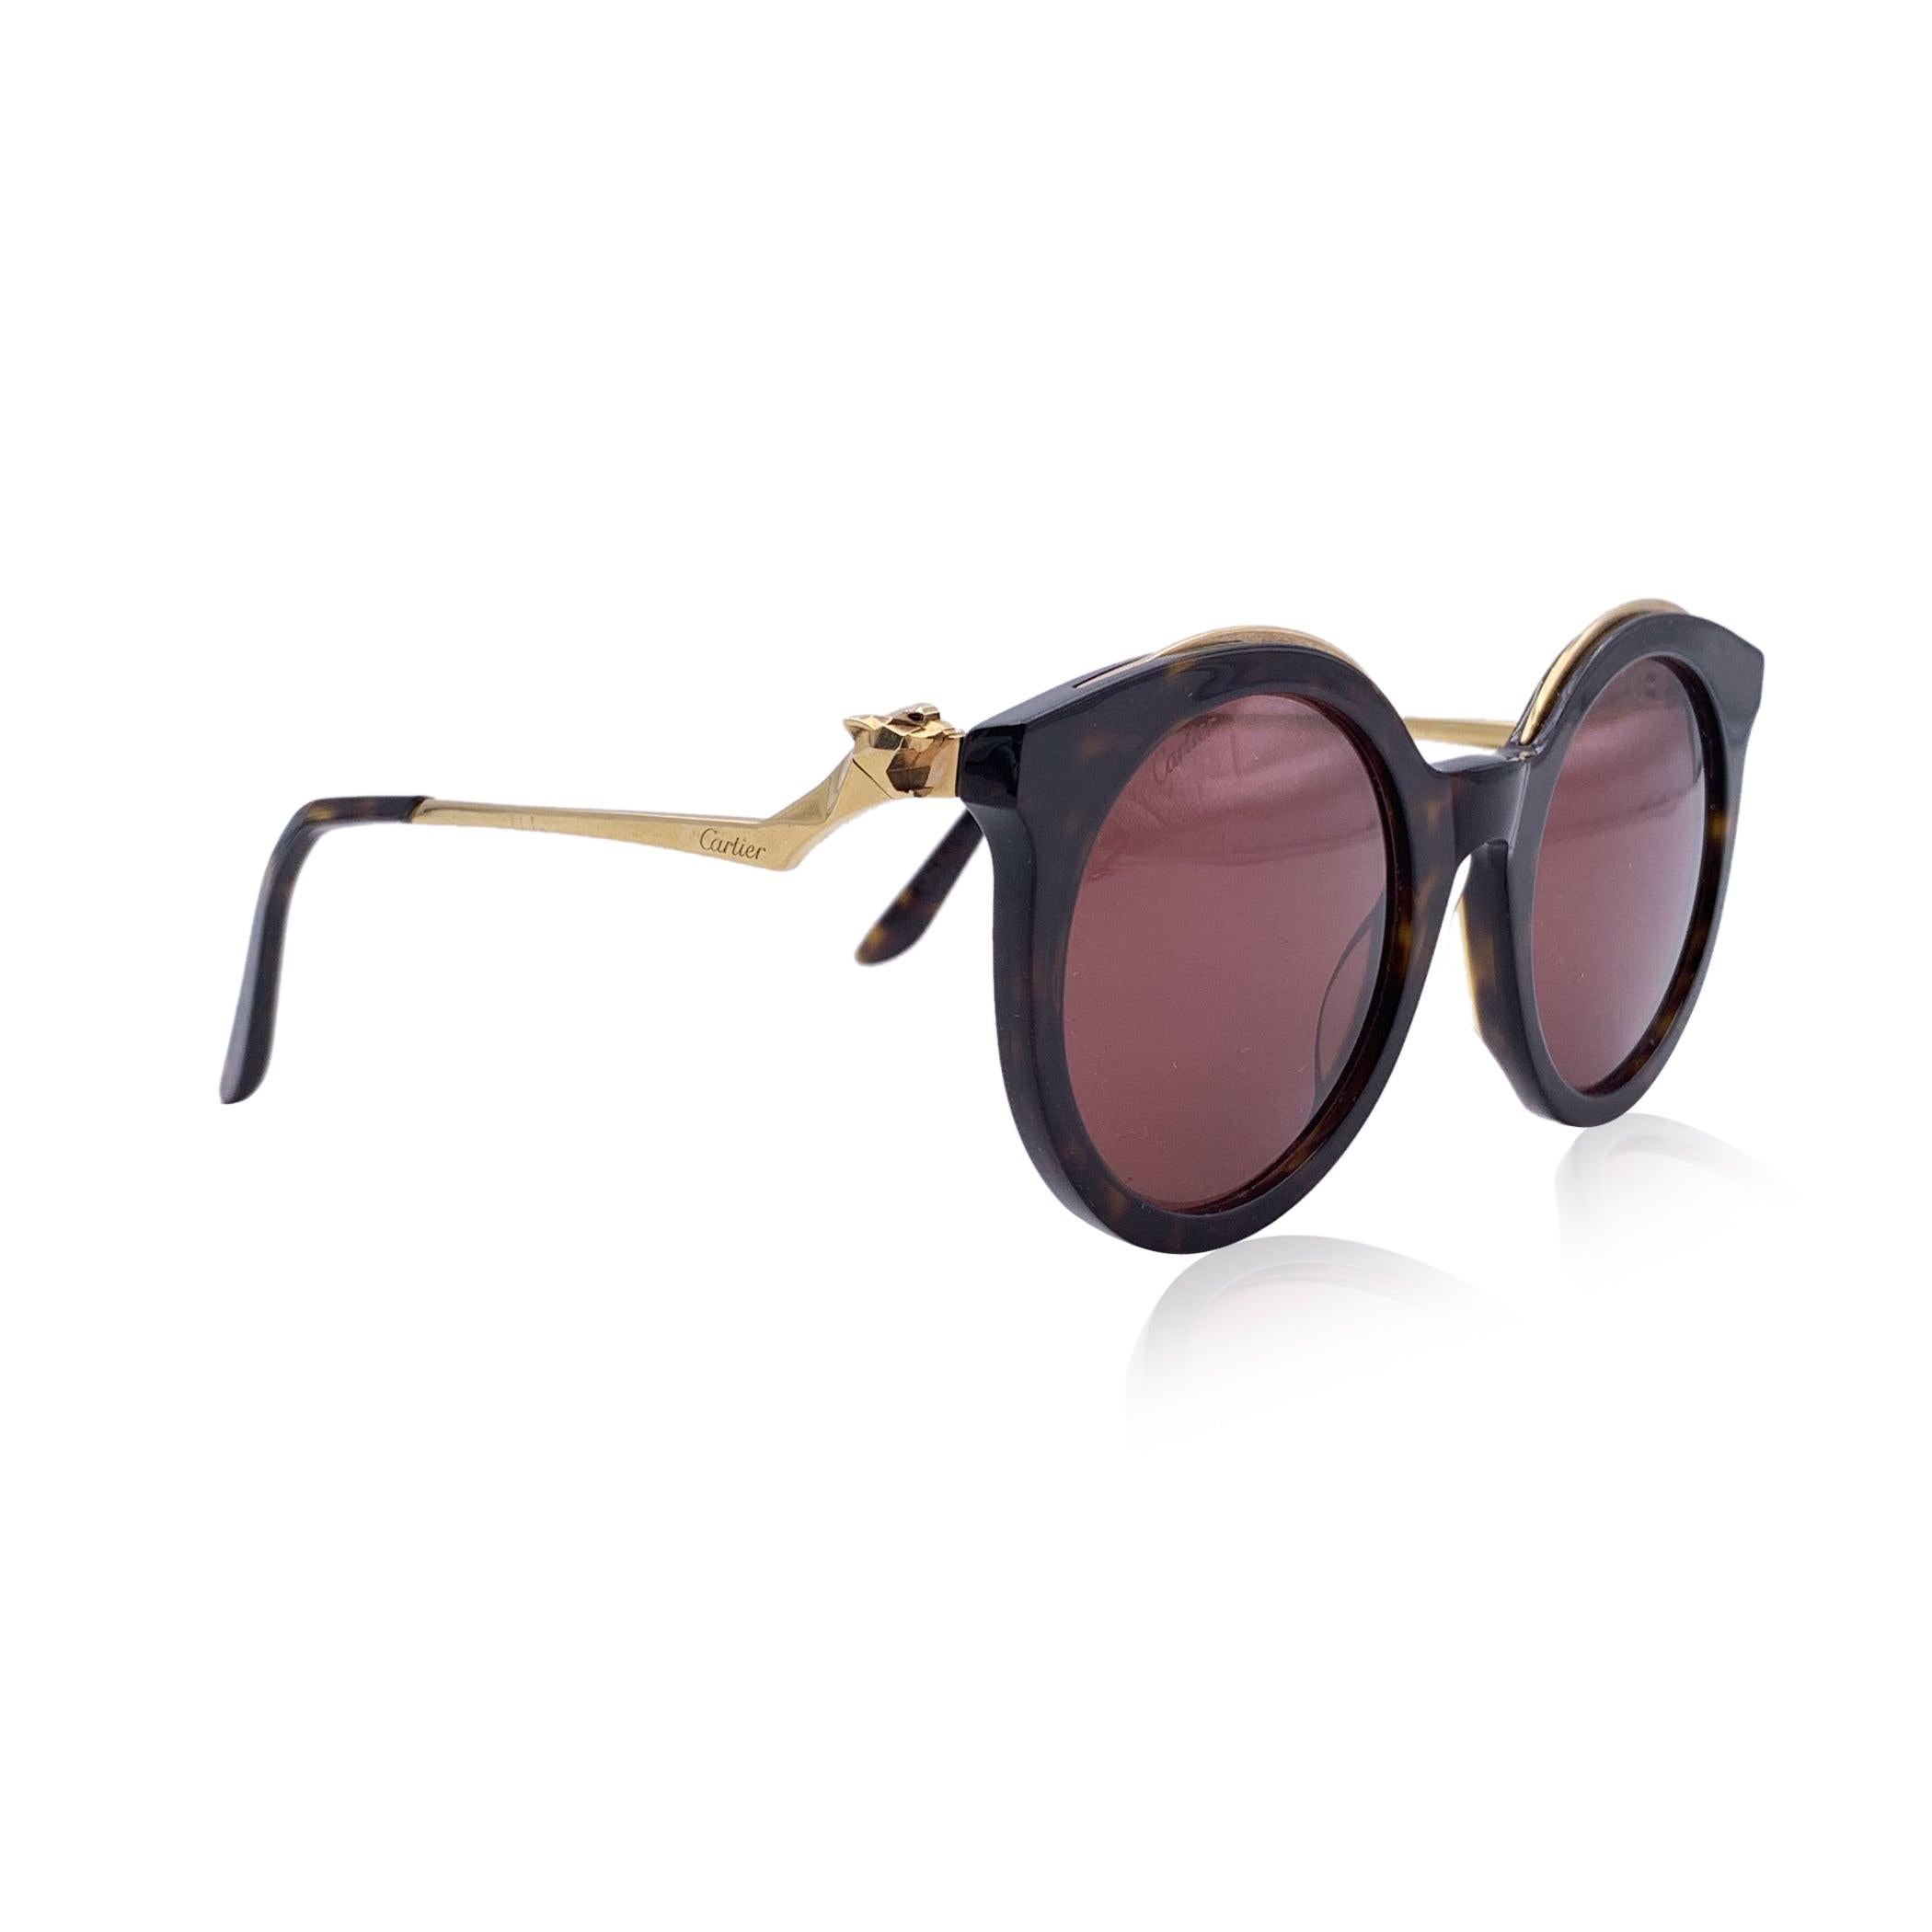 CARTIER CT0118S Cat.3 sunglasses. Black frame with original Cartier colored lenses. Gold color details. Round design. Temples with panther decoration. Made in France Details MATERIAL: Plastic COLOR: Black MODEL: CT0118S GENDER: Unisex Adults COUNTRY